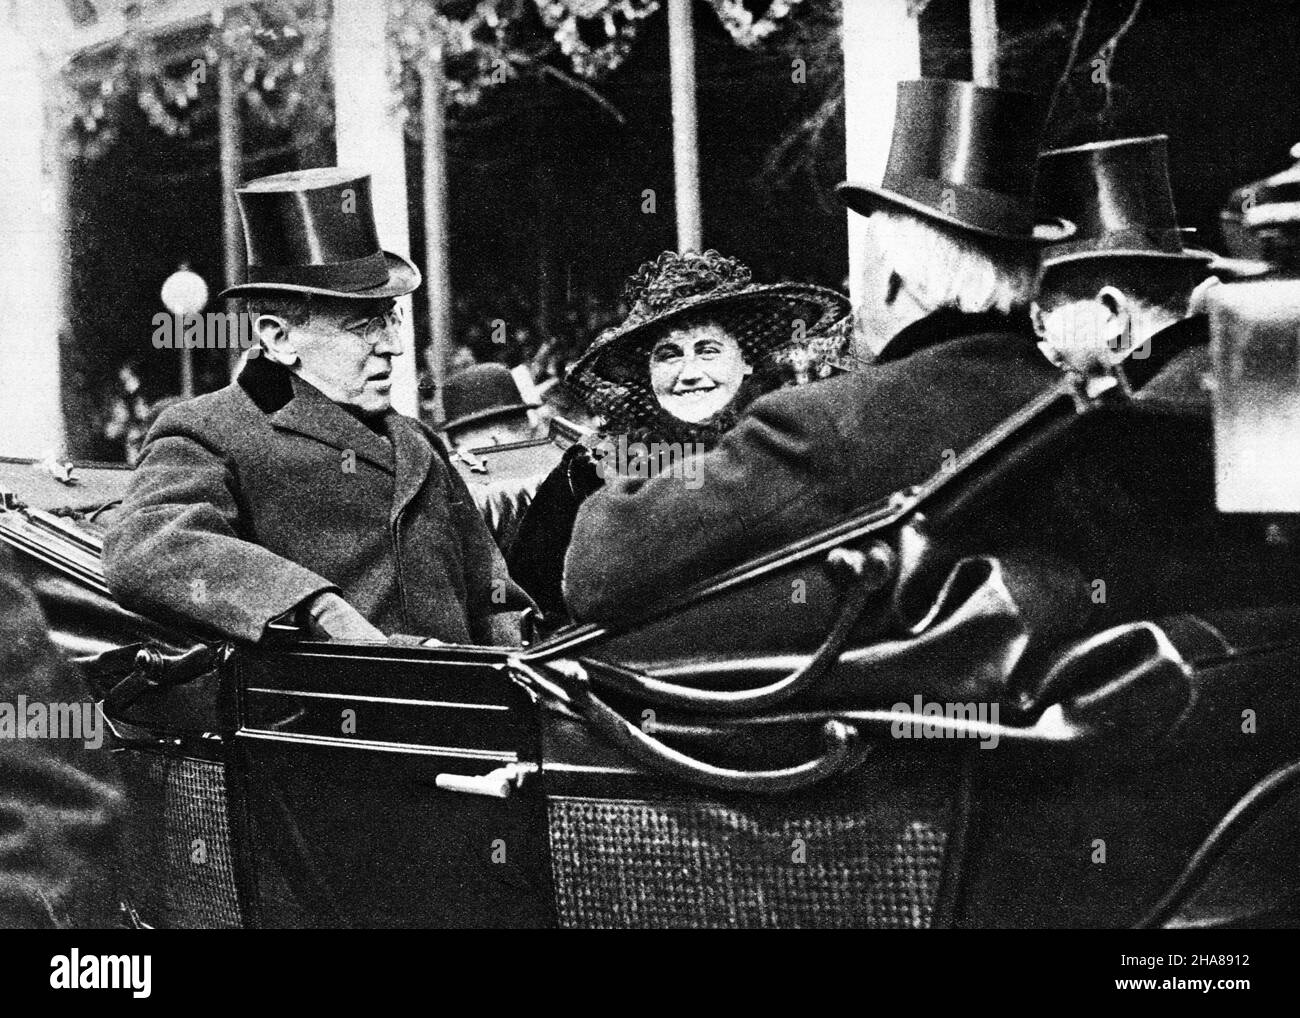 1910s PRESIDENT AND MRS. WOODROW WILSON IN OPEN CARRIAGE ON OCCASION OF HIS SECOND INAUGURATION MARCH 4, 1917 - h9423 HAR001 HARS WOODROW AND DISTRICT OF COLUMBIA LEADERSHIP LOW ANGLE POLITICIAN WORLD WARS OCCASION PRESIDENTIAL WORLD WAR ACADEMIC OCCUPATIONS POLITICS PRESIDENTS CAPITAL INAUGURATION TOP HATS SECOND STYLISH WOODROW WILSON DEMOCRAT WIVES WORLD WAR ONE WW1 1917 BLACK AND WHITE CAUCASIAN ETHNICITY DISTRICT FEDERAL HAR001 MRS. OLD FASHIONED Stock Photo